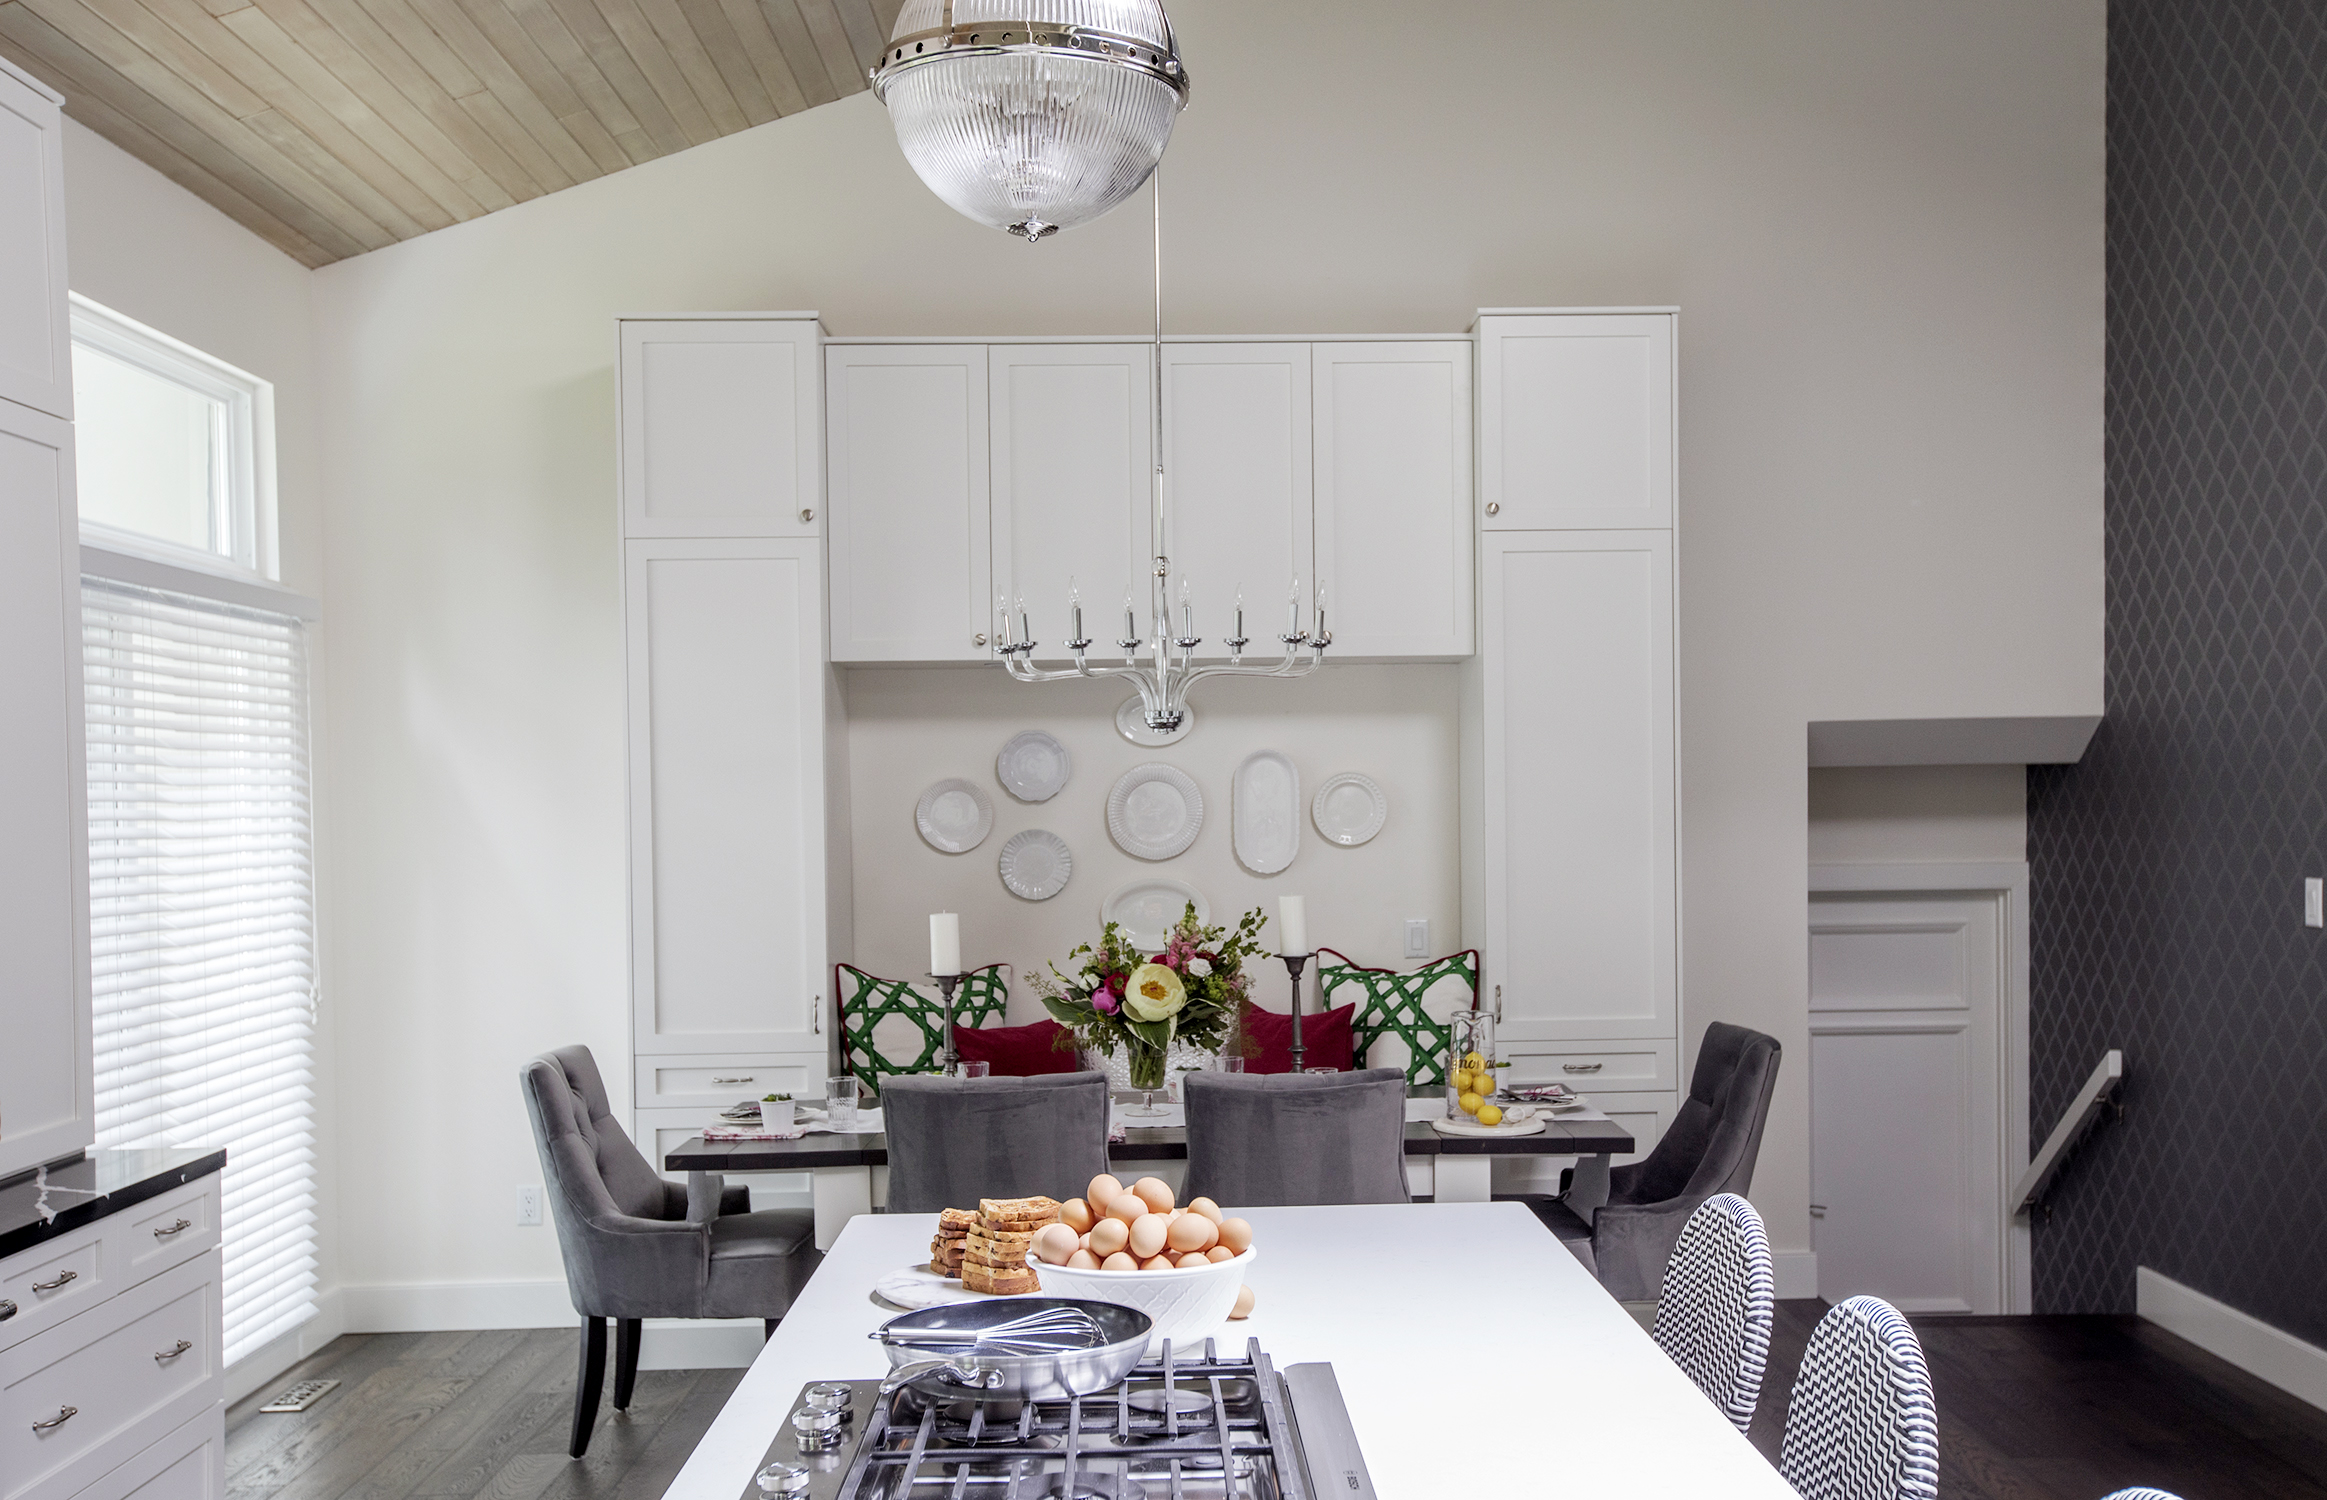 Modern white kitchen with built-in banquette